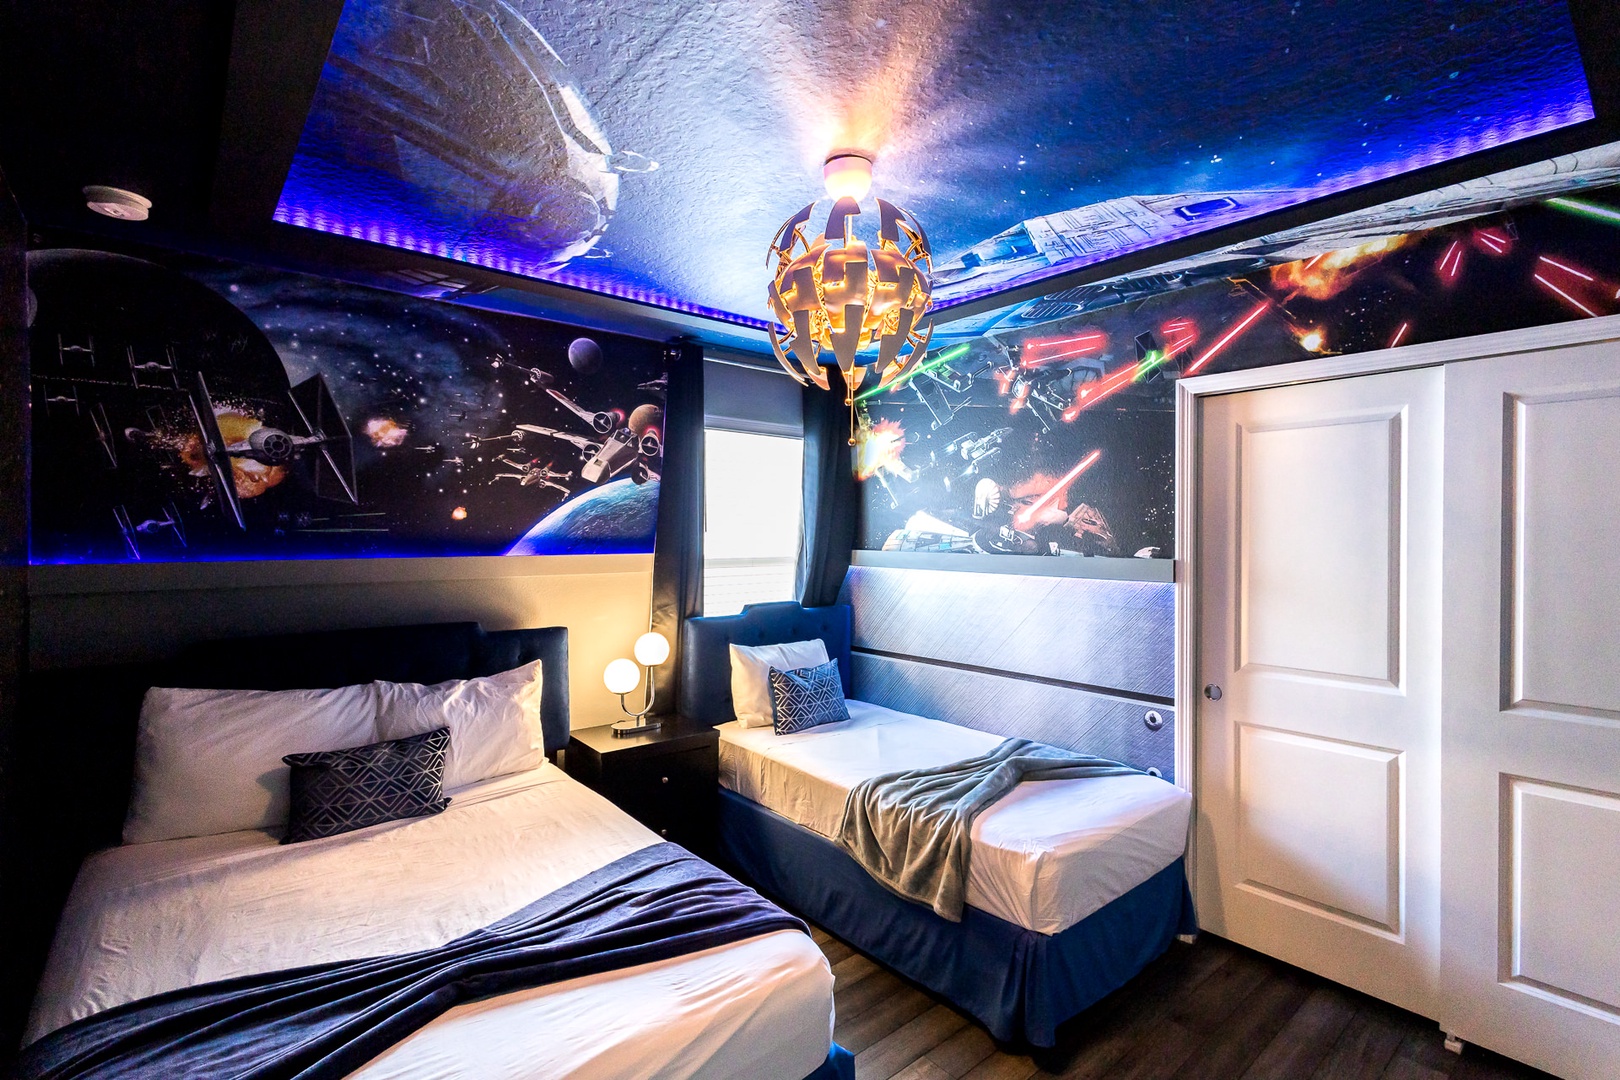 Be One With the Force in this Star Wars themed room with a Full bed, and Twin bed